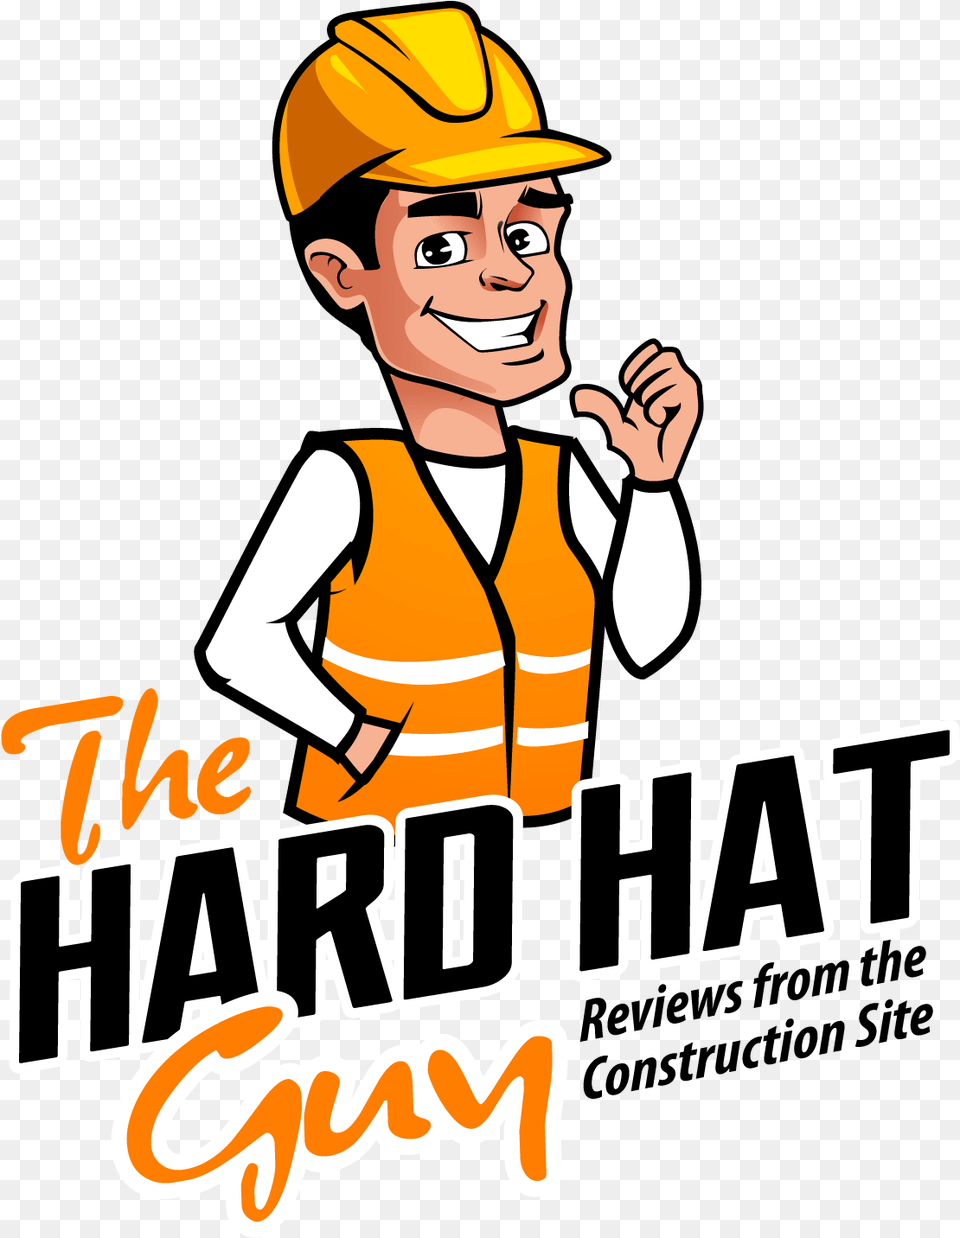 The Hard Hat Guy Construction Gear Reviews Cartoon, Helmet, Clothing, Hardhat, Advertisement Png Image